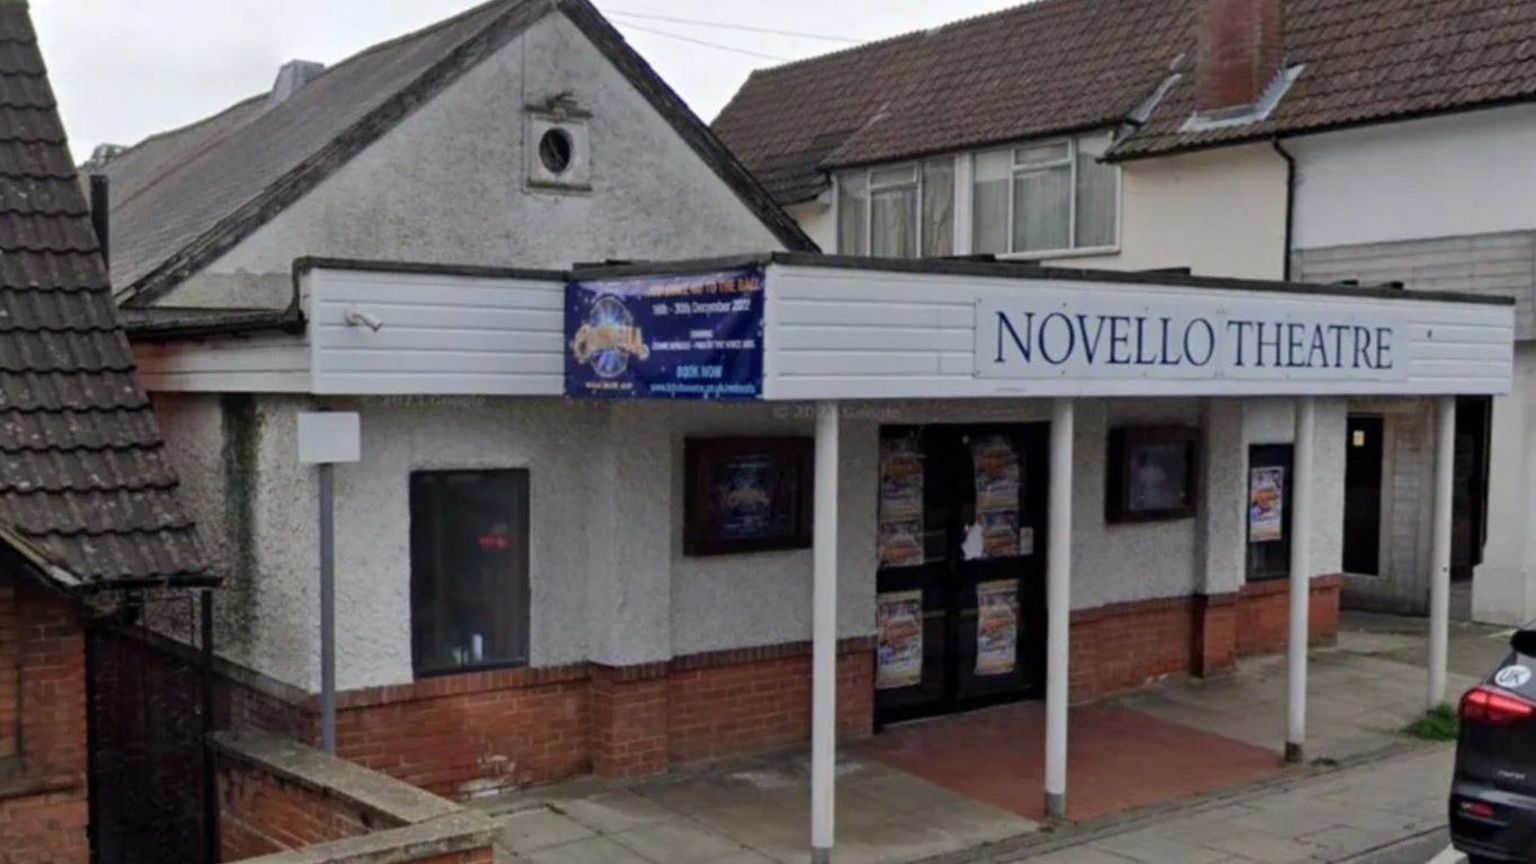 Exterior of the Novello. A white rendered building with a pitch roof and a covered entrance supported by small pillars that extends over the pavement